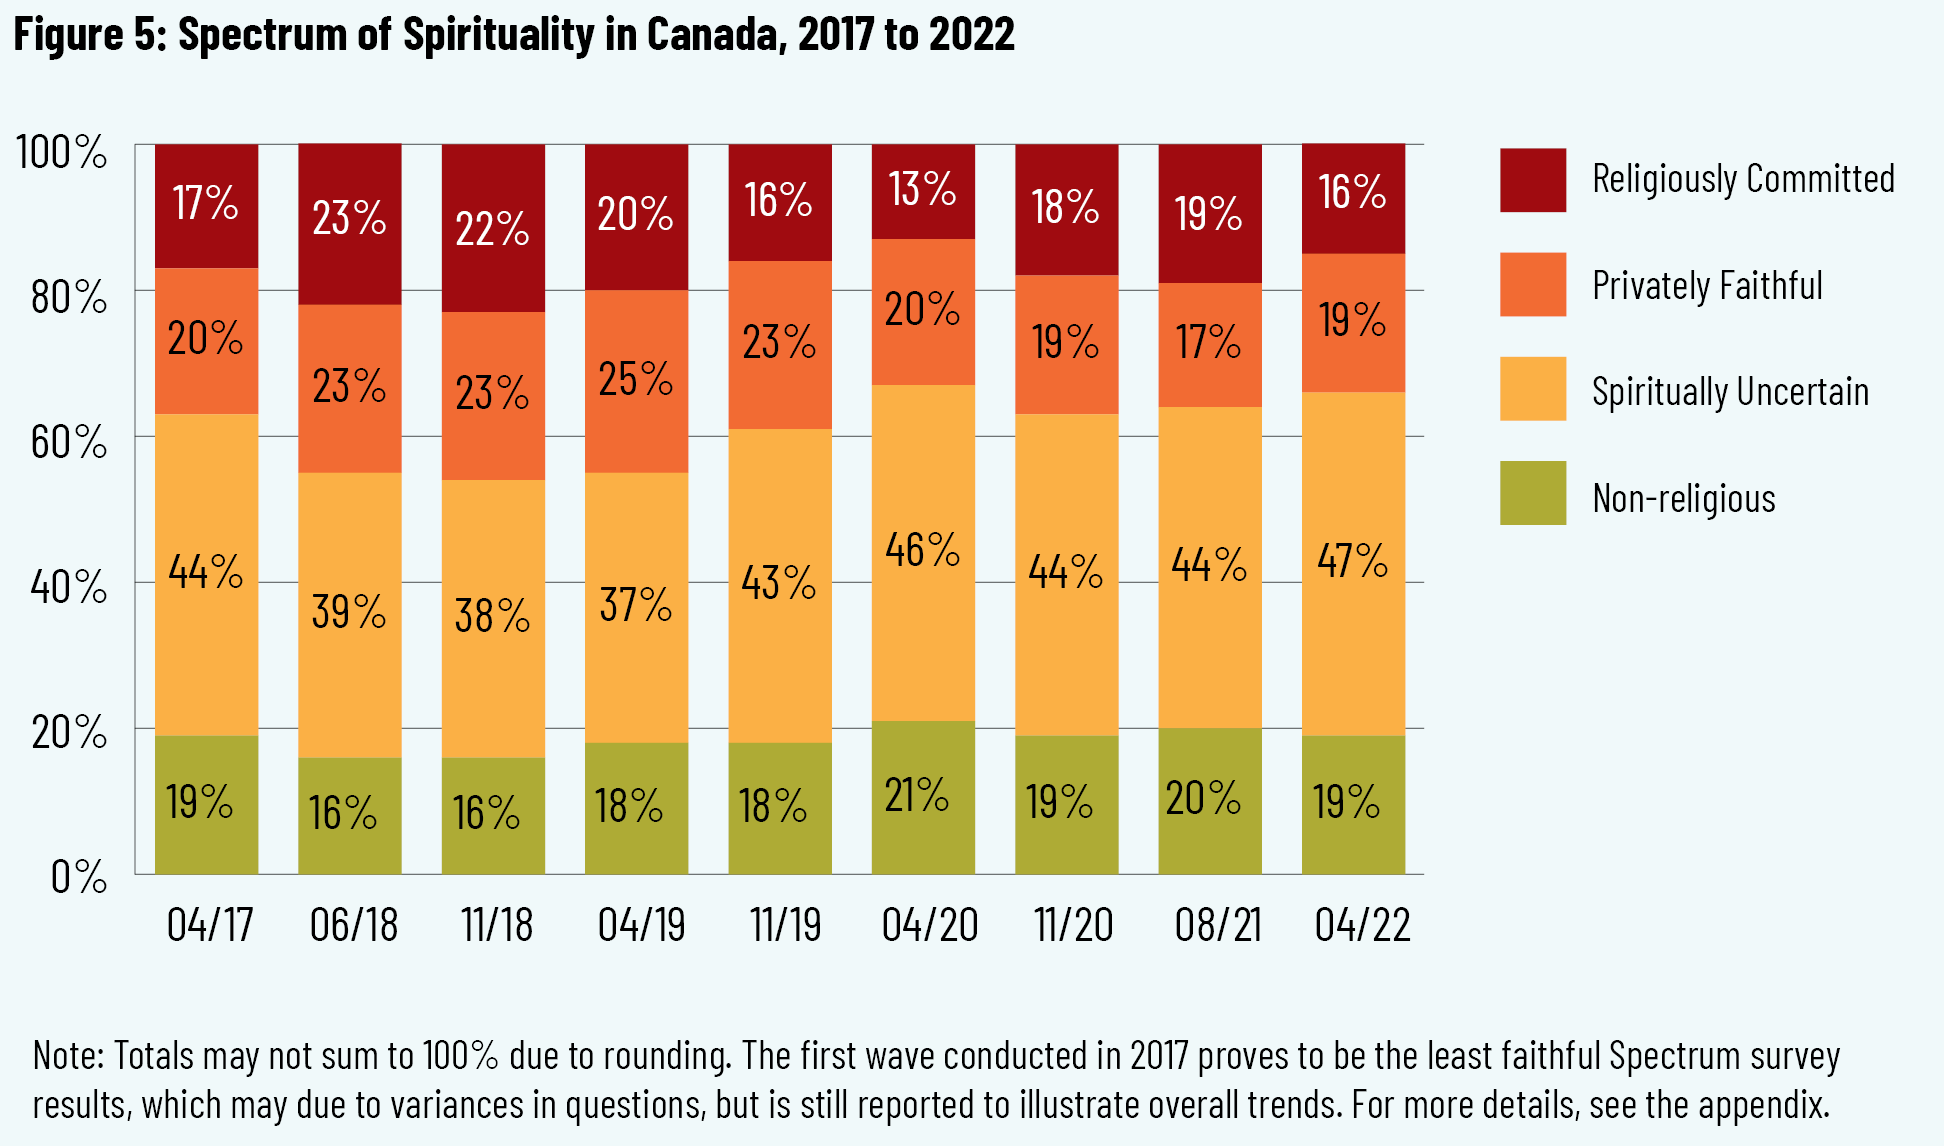 Figure 5: Spectrum of Spirituality in Canada, 2017 to 2022